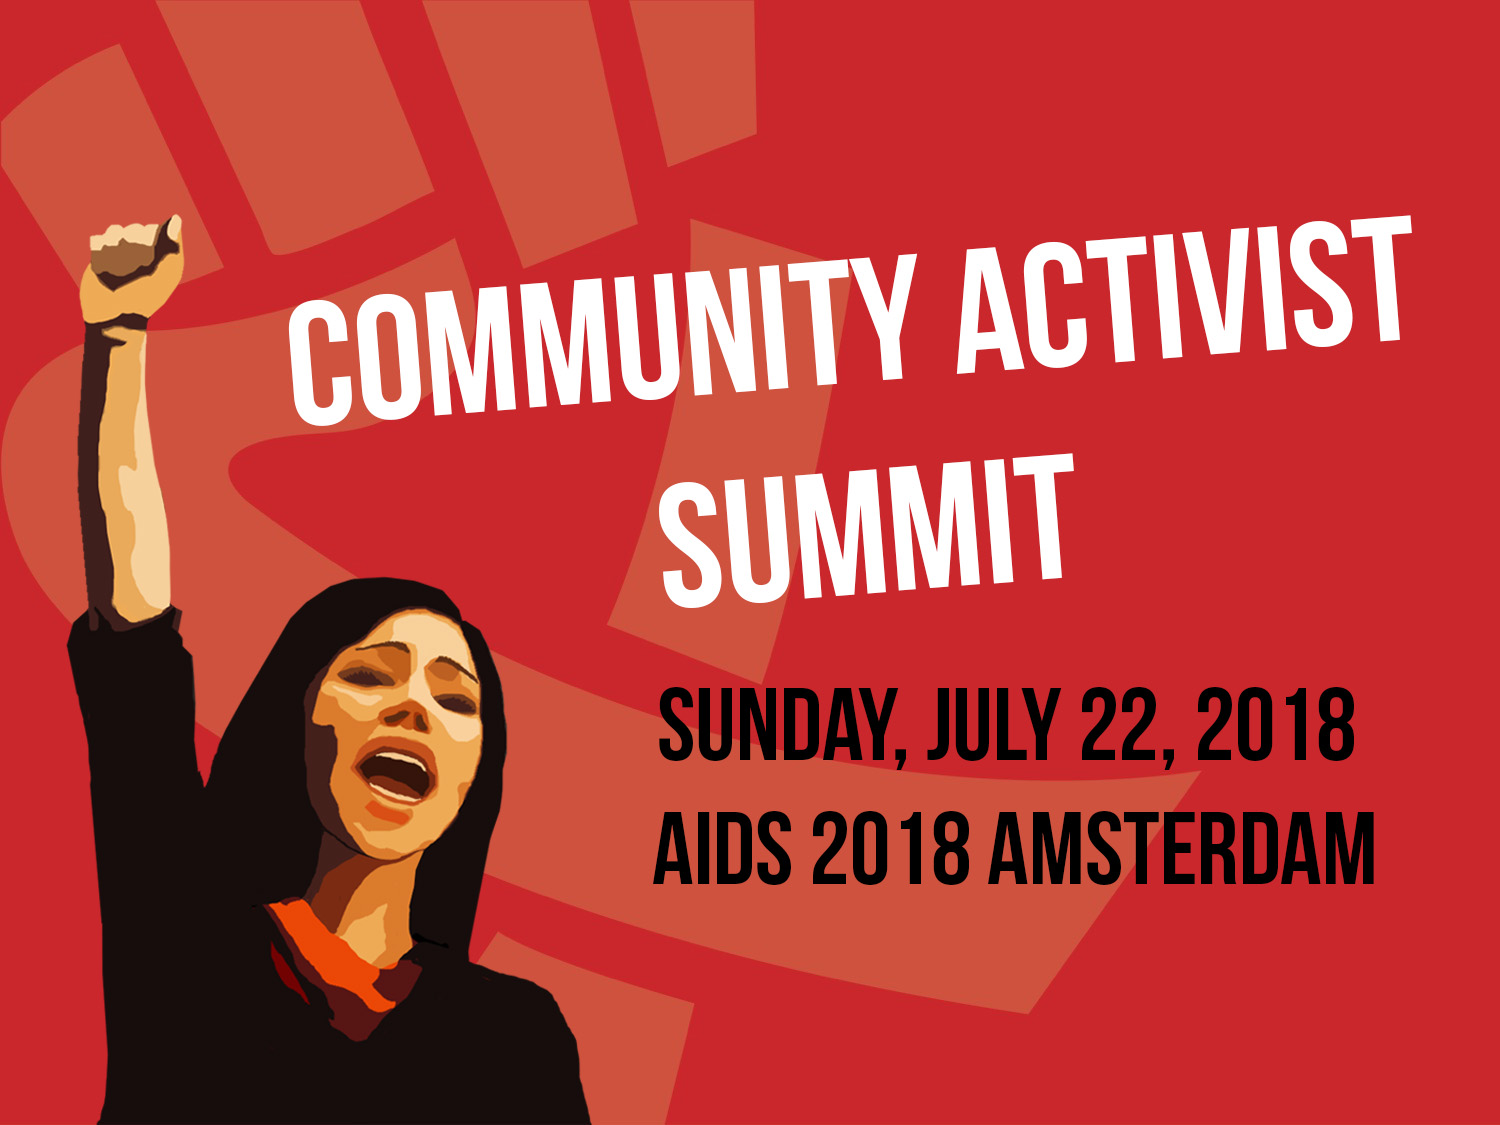 Save the Date: Join ITPC at the Community Activist Summit at AIDS 2018